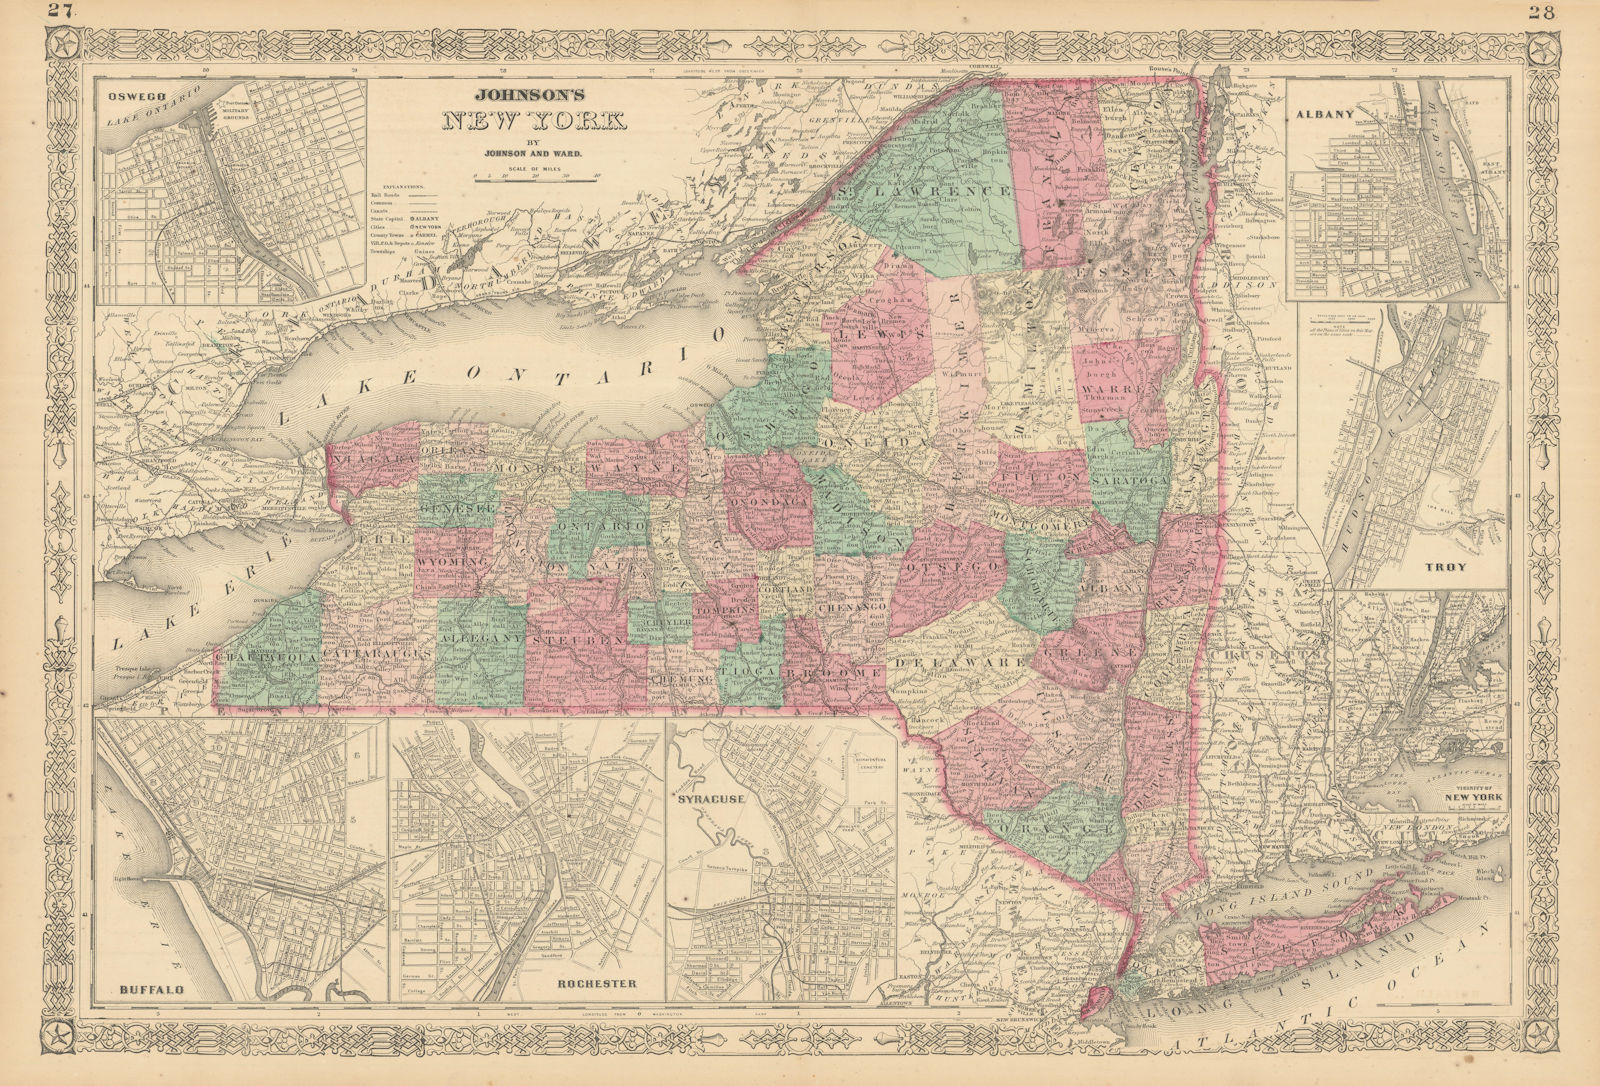 Associate Product Johnson's New York state map. Albany Troy Rochester Buffalo Syracuse 1866